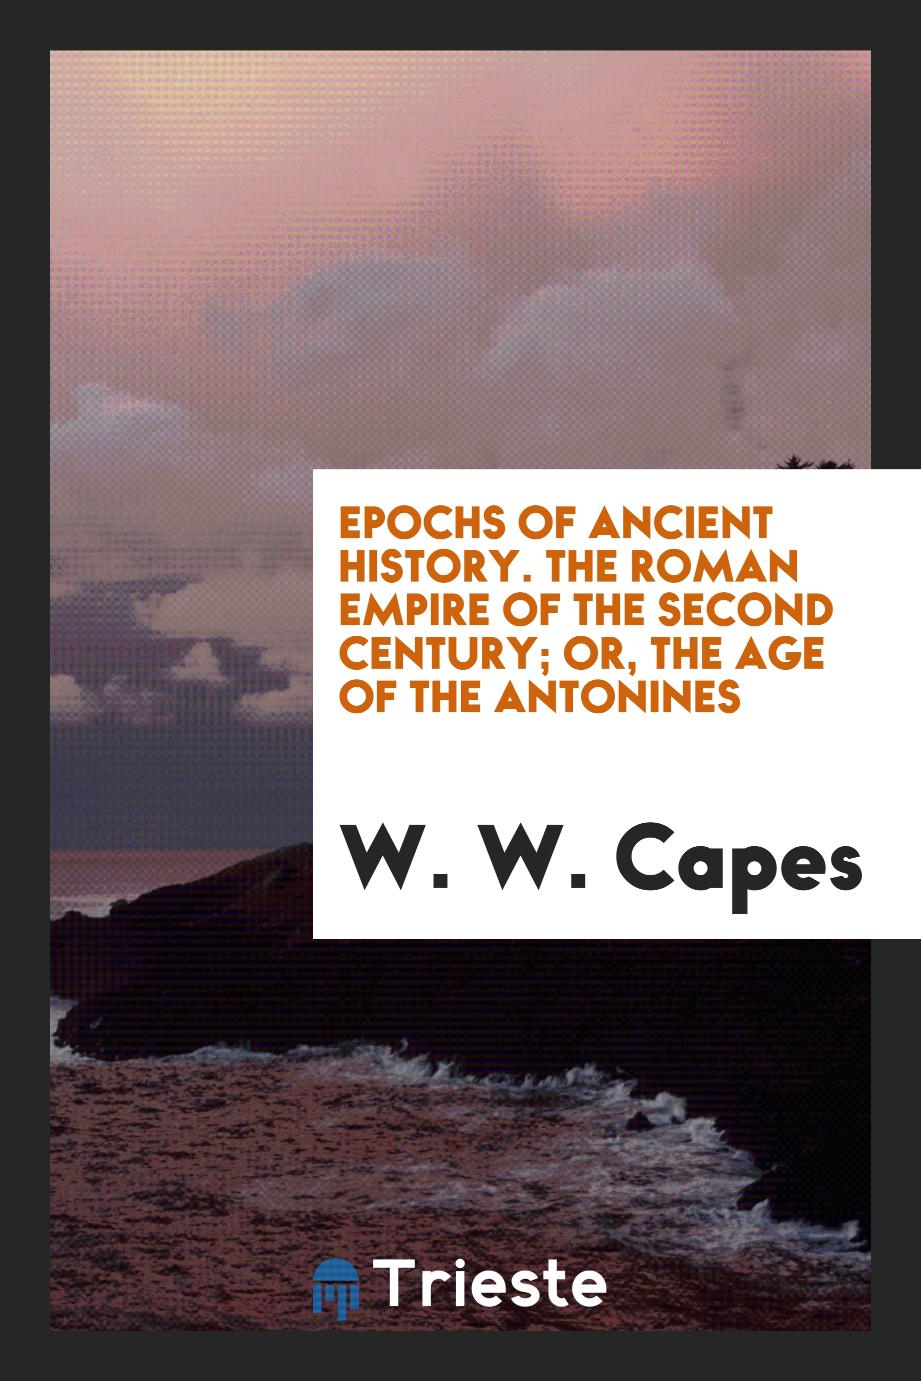 Epochs of Ancient History. The Roman Empire of the Second Century; Or, the Age of the Antonines